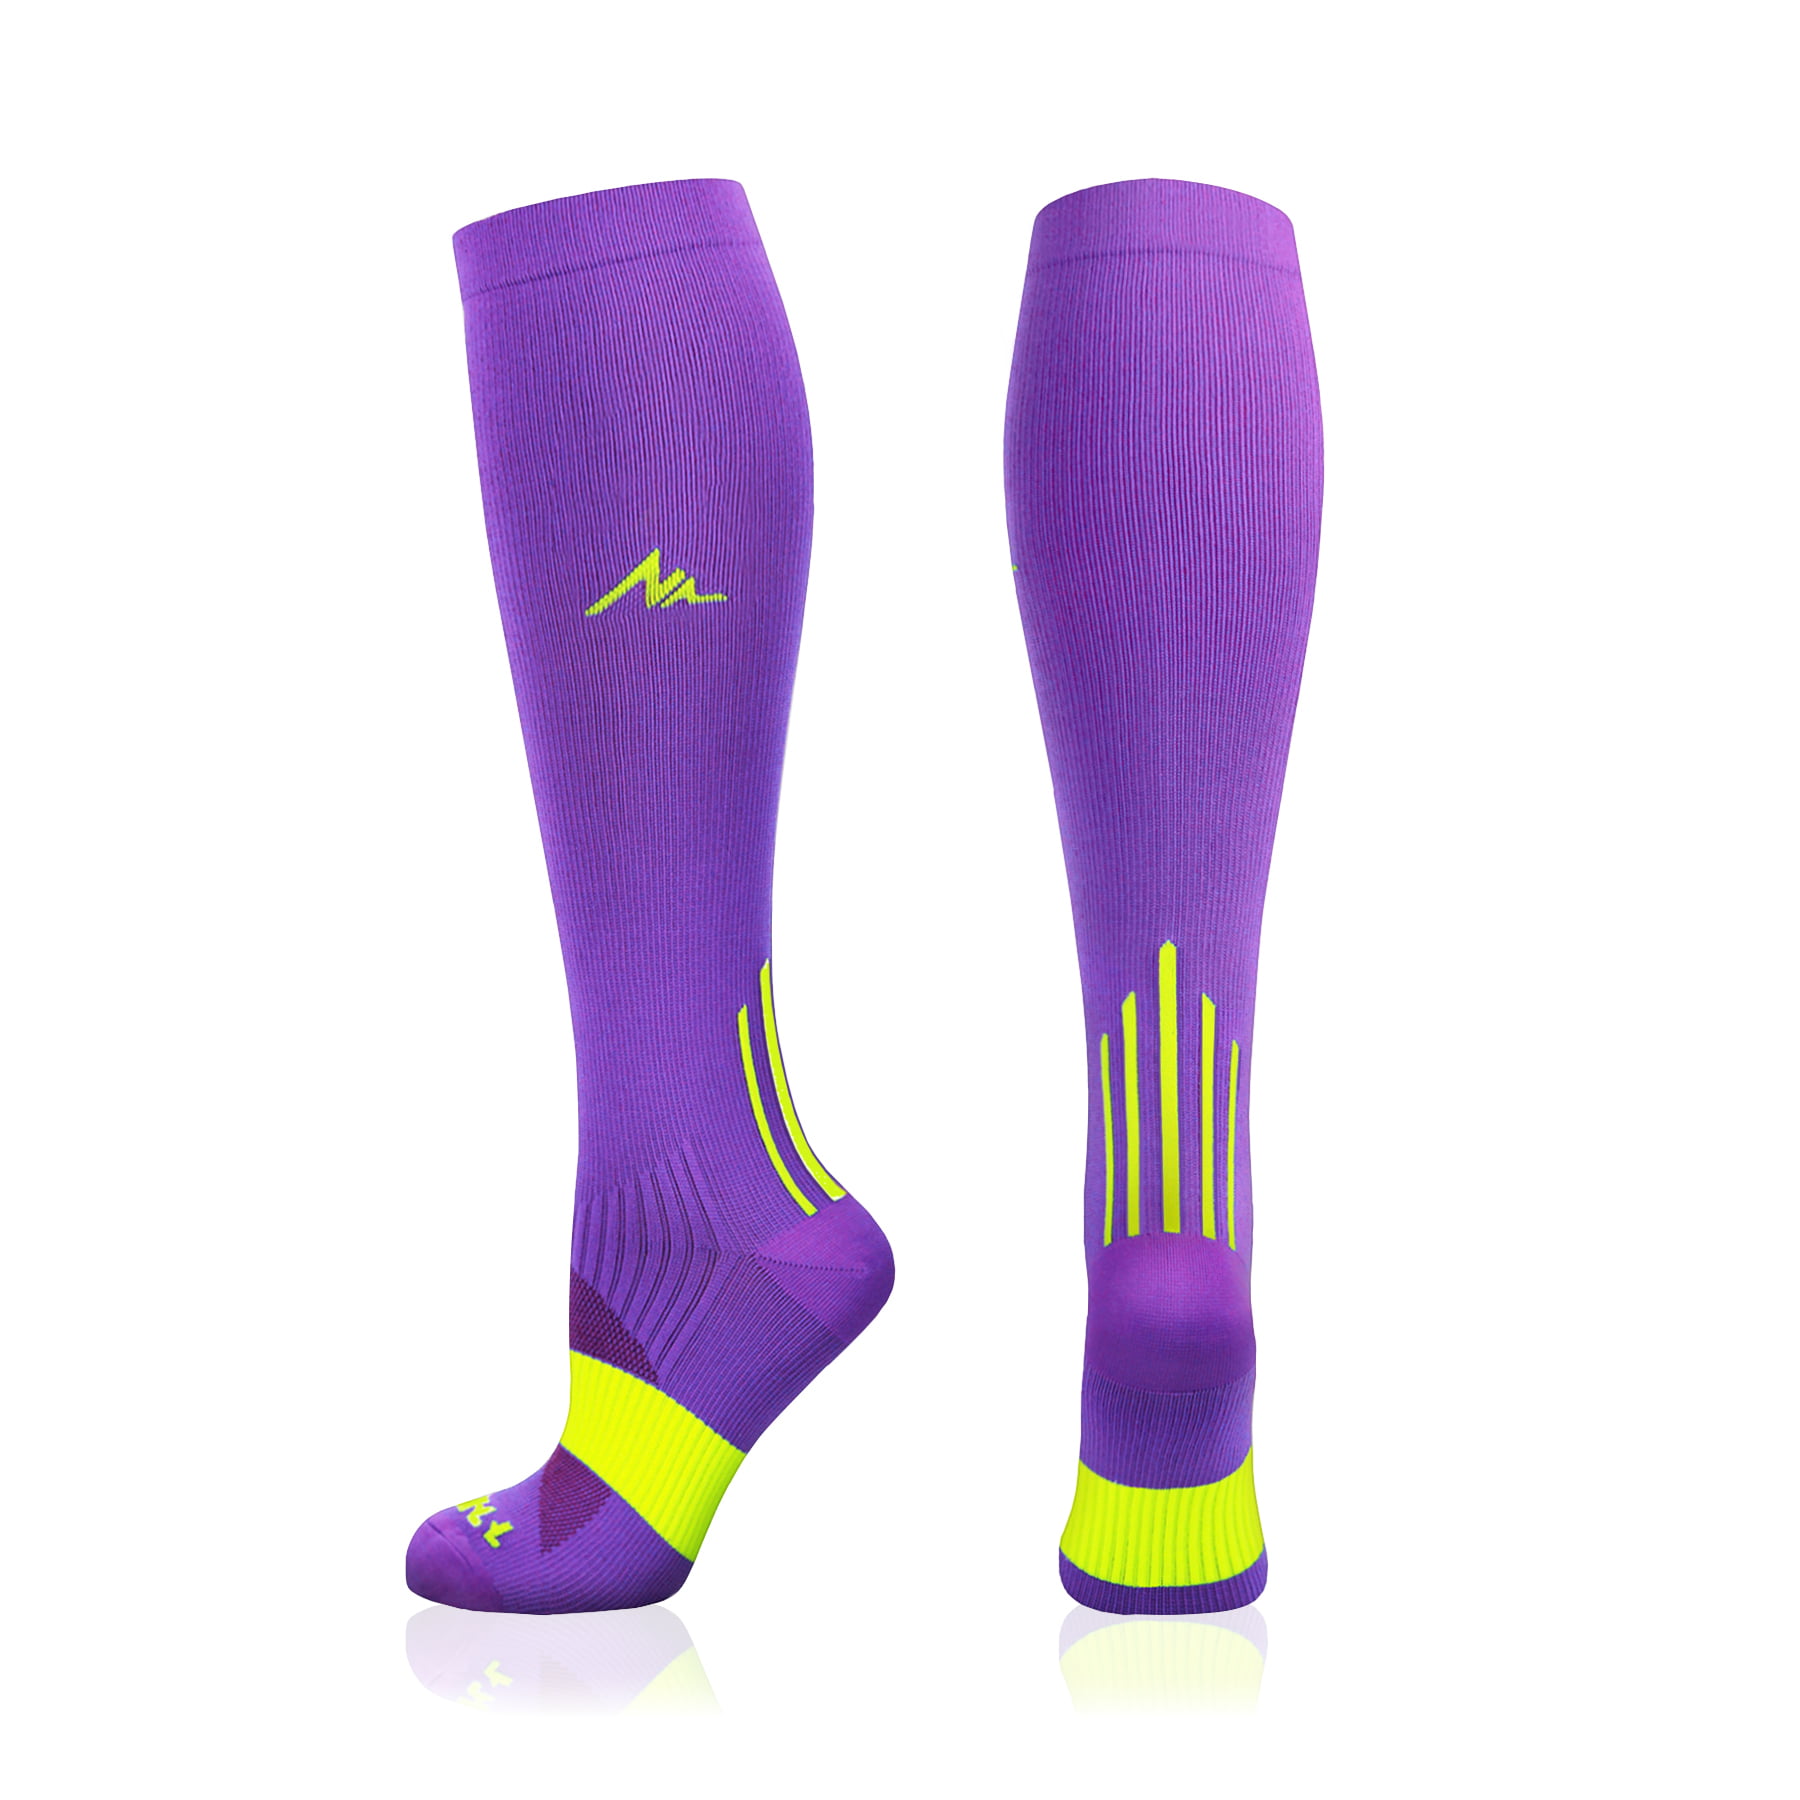 NEWZILL Compression Socks U.S Olympic Fencer Recommend for Men & Women 20-30mmHg 